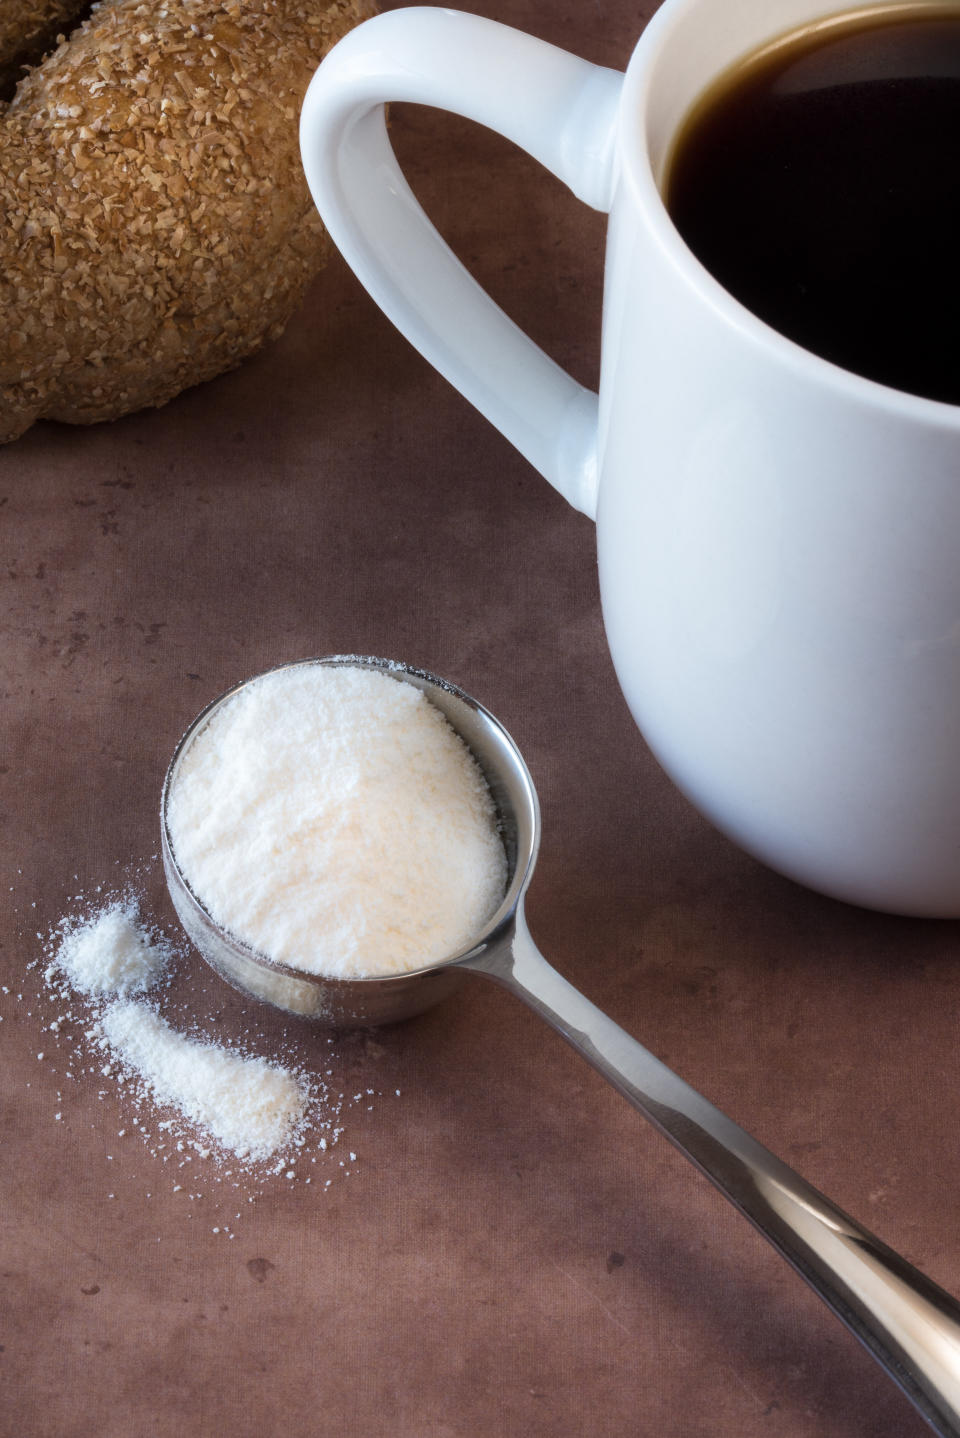 The top ingredients in Coffee-Mate&rsquo;s original powdered coffee creamer aren&rsquo;t exactly dairy: corn syrup solids and hydrogenated vegetable oil (coconut and/or palm kernel and/or soybean). (Photo: Michelle Arnold / EyeEm via Getty Images)